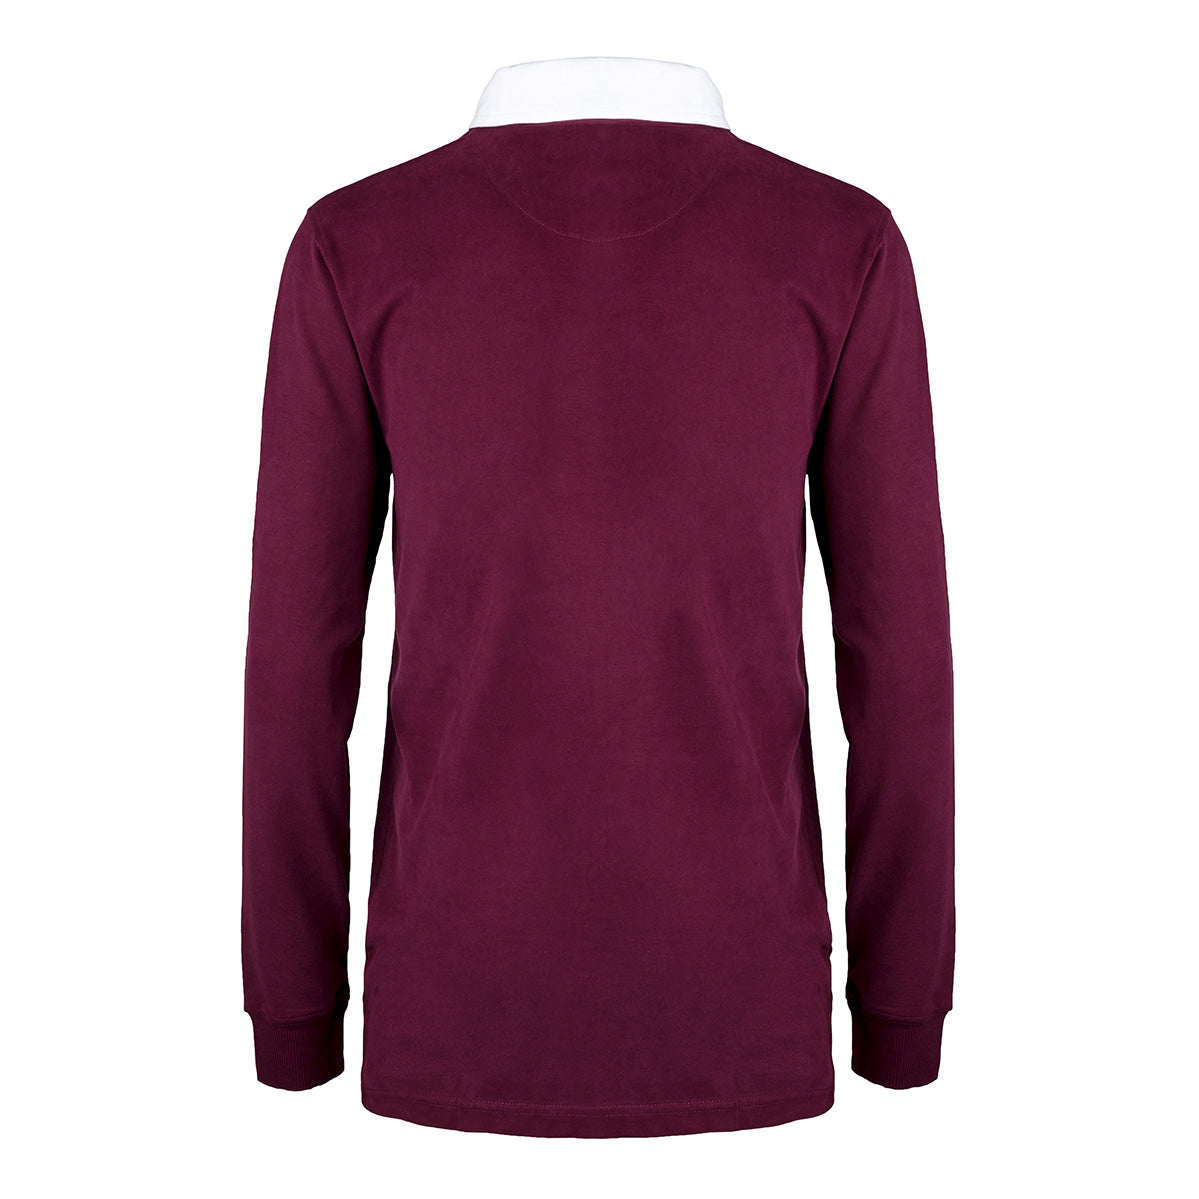 'New Style' Brushed Cotton Rugby Shirt with SOC Logo - Burgundy